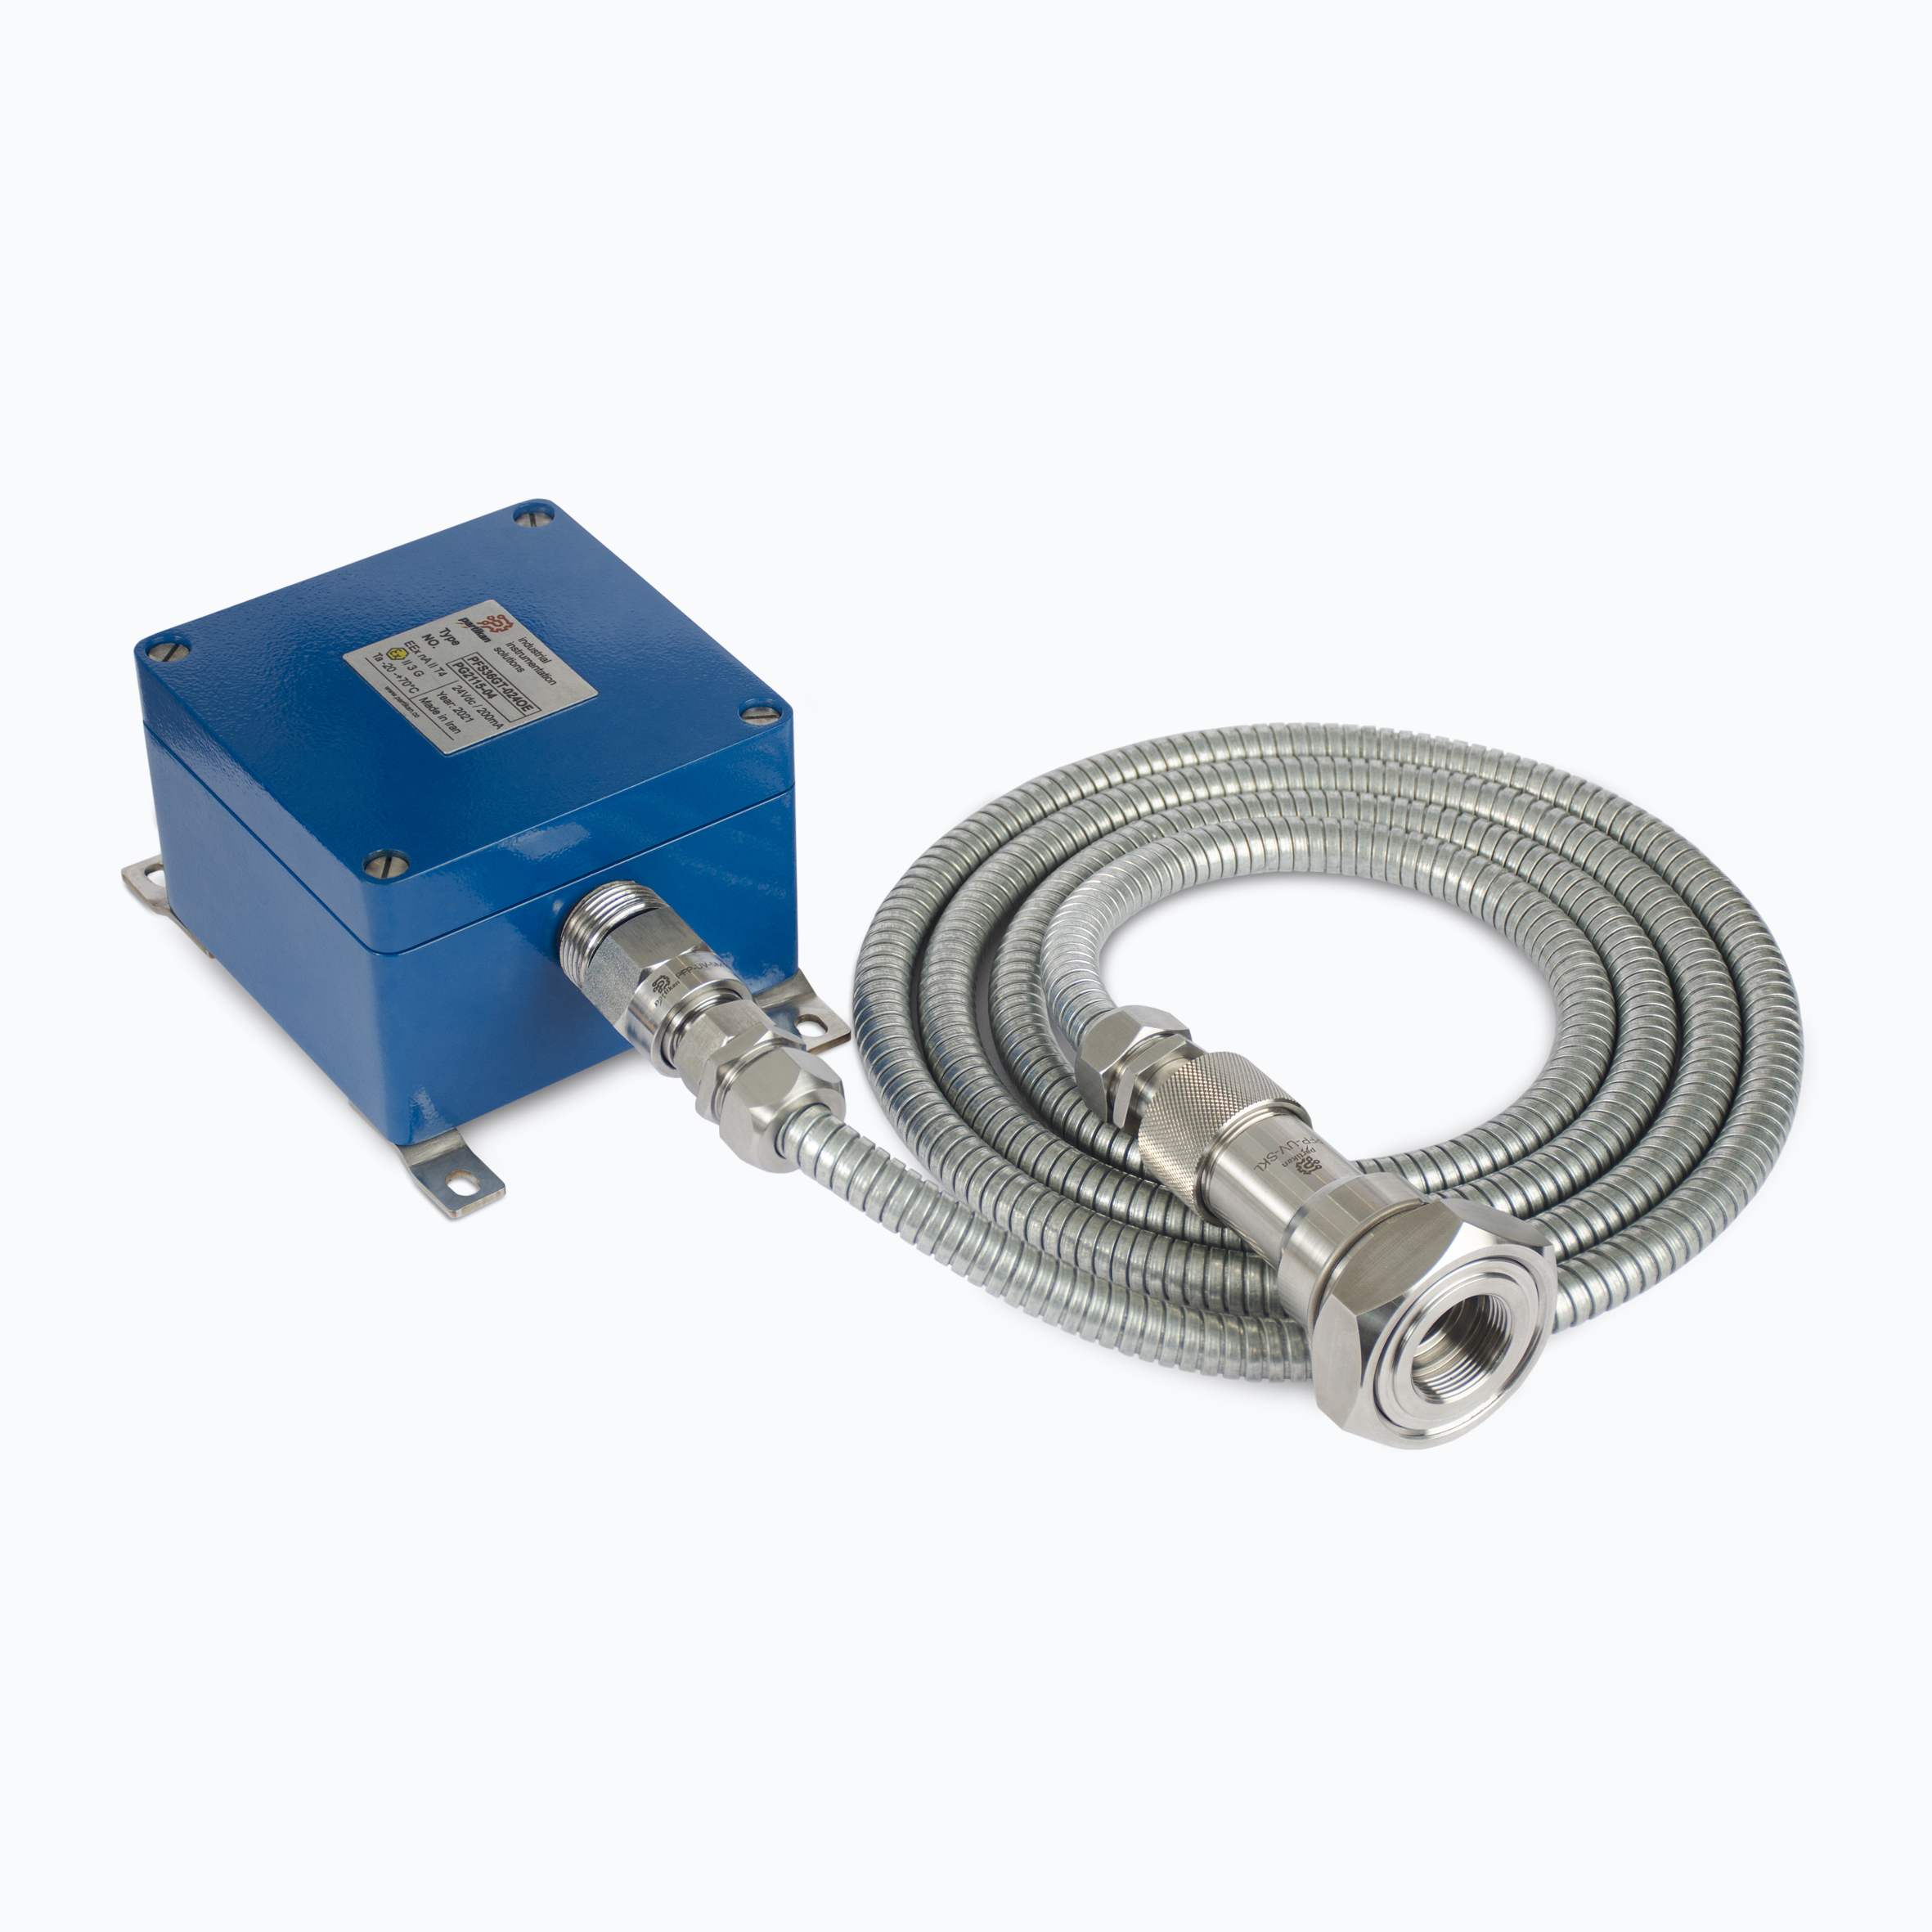 Fiber Optic Cable System PFS36GT-24OE